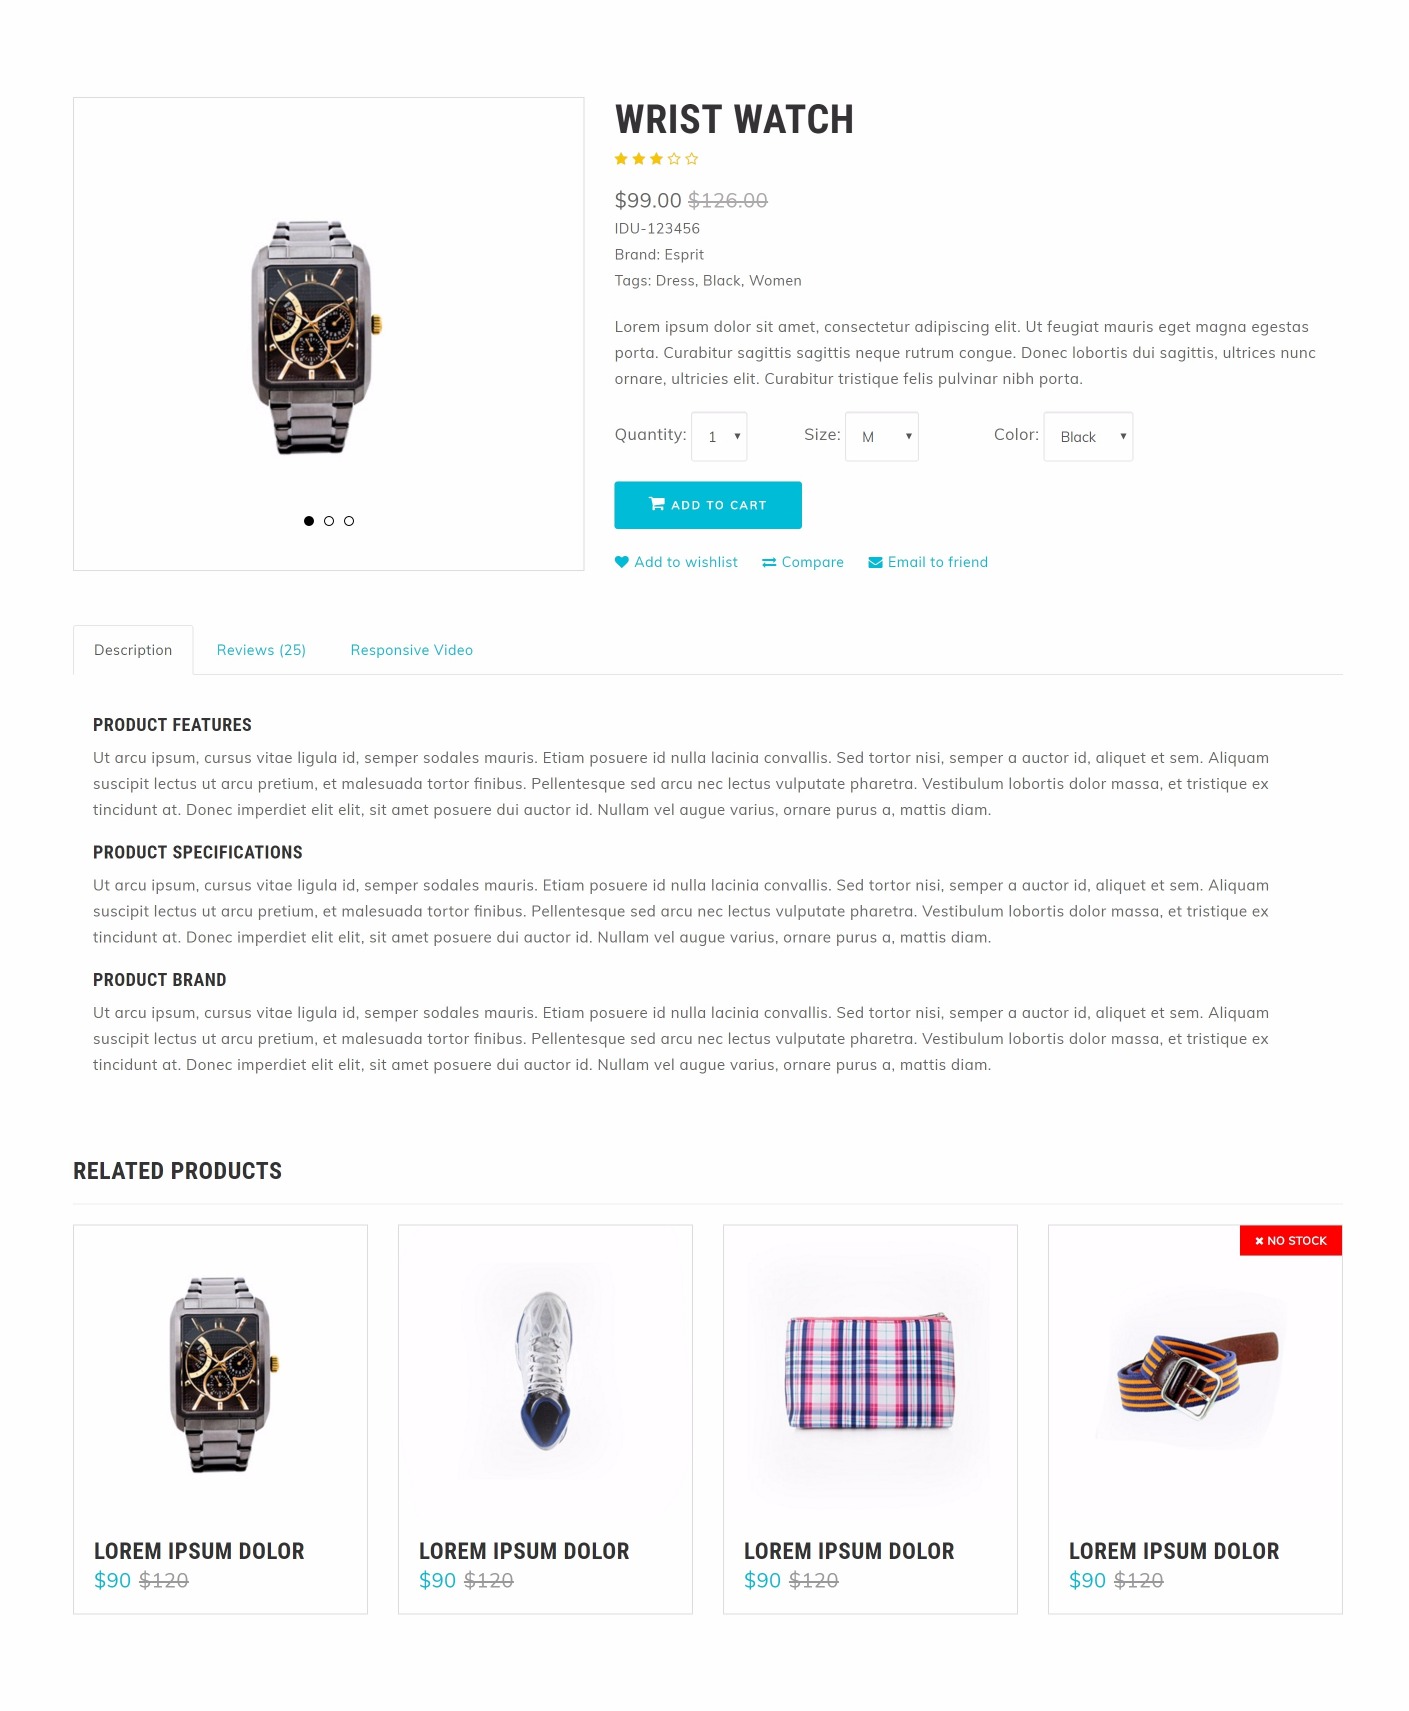 Solo - 103+ Pages HTML Bootstrap Template - 30